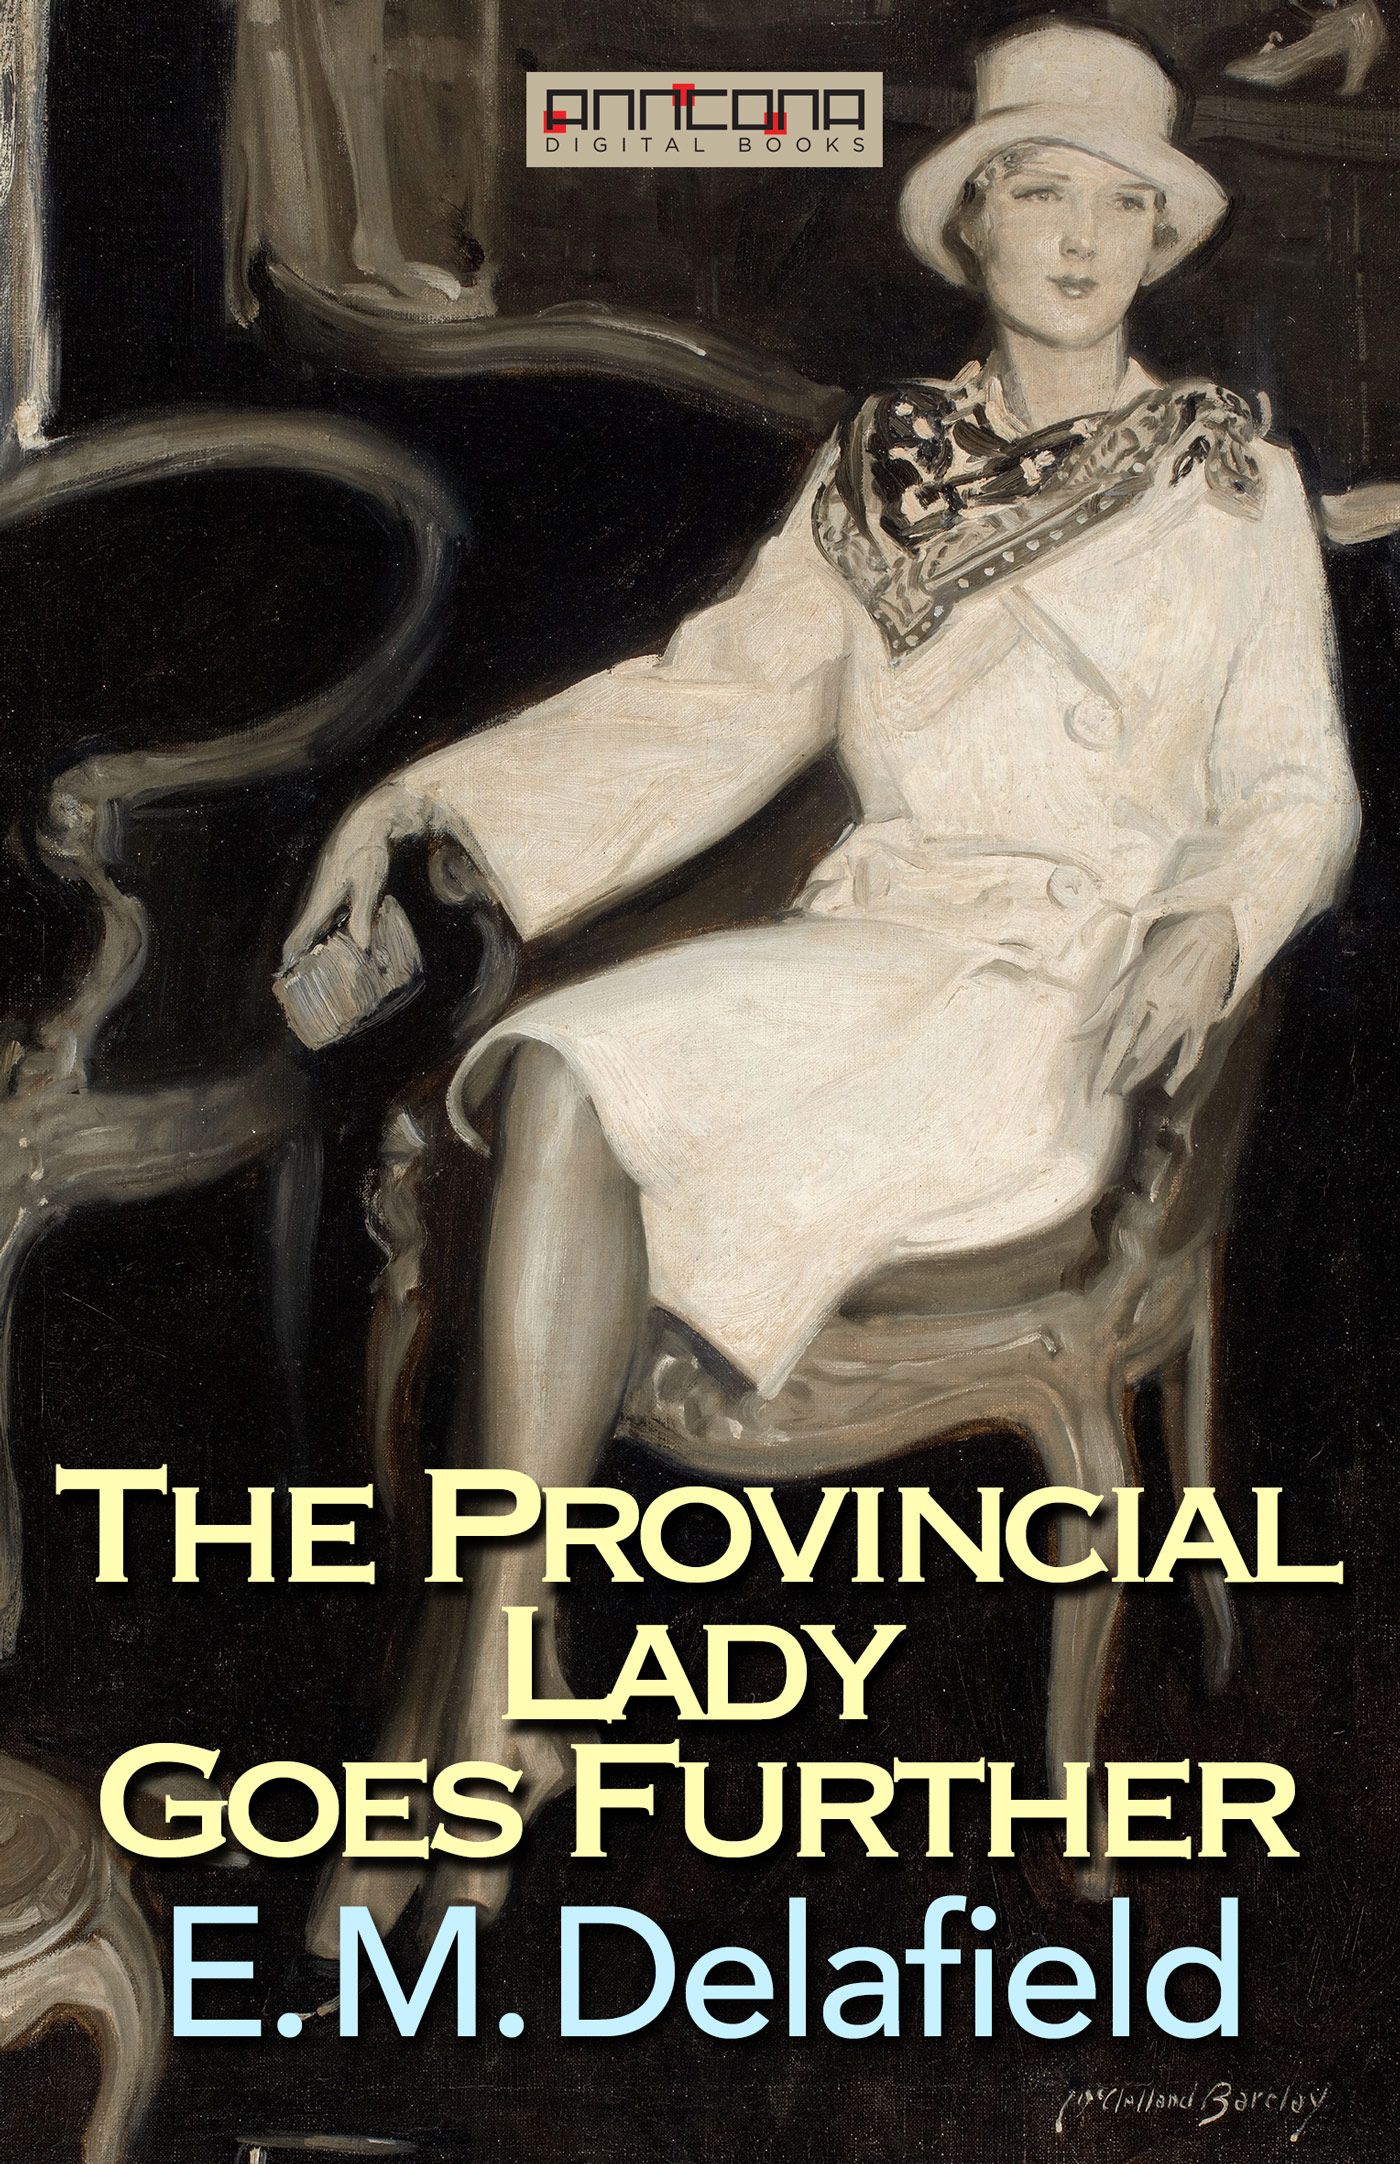 The Provincial Lady Goes Further, eBook by E. M. Delafield